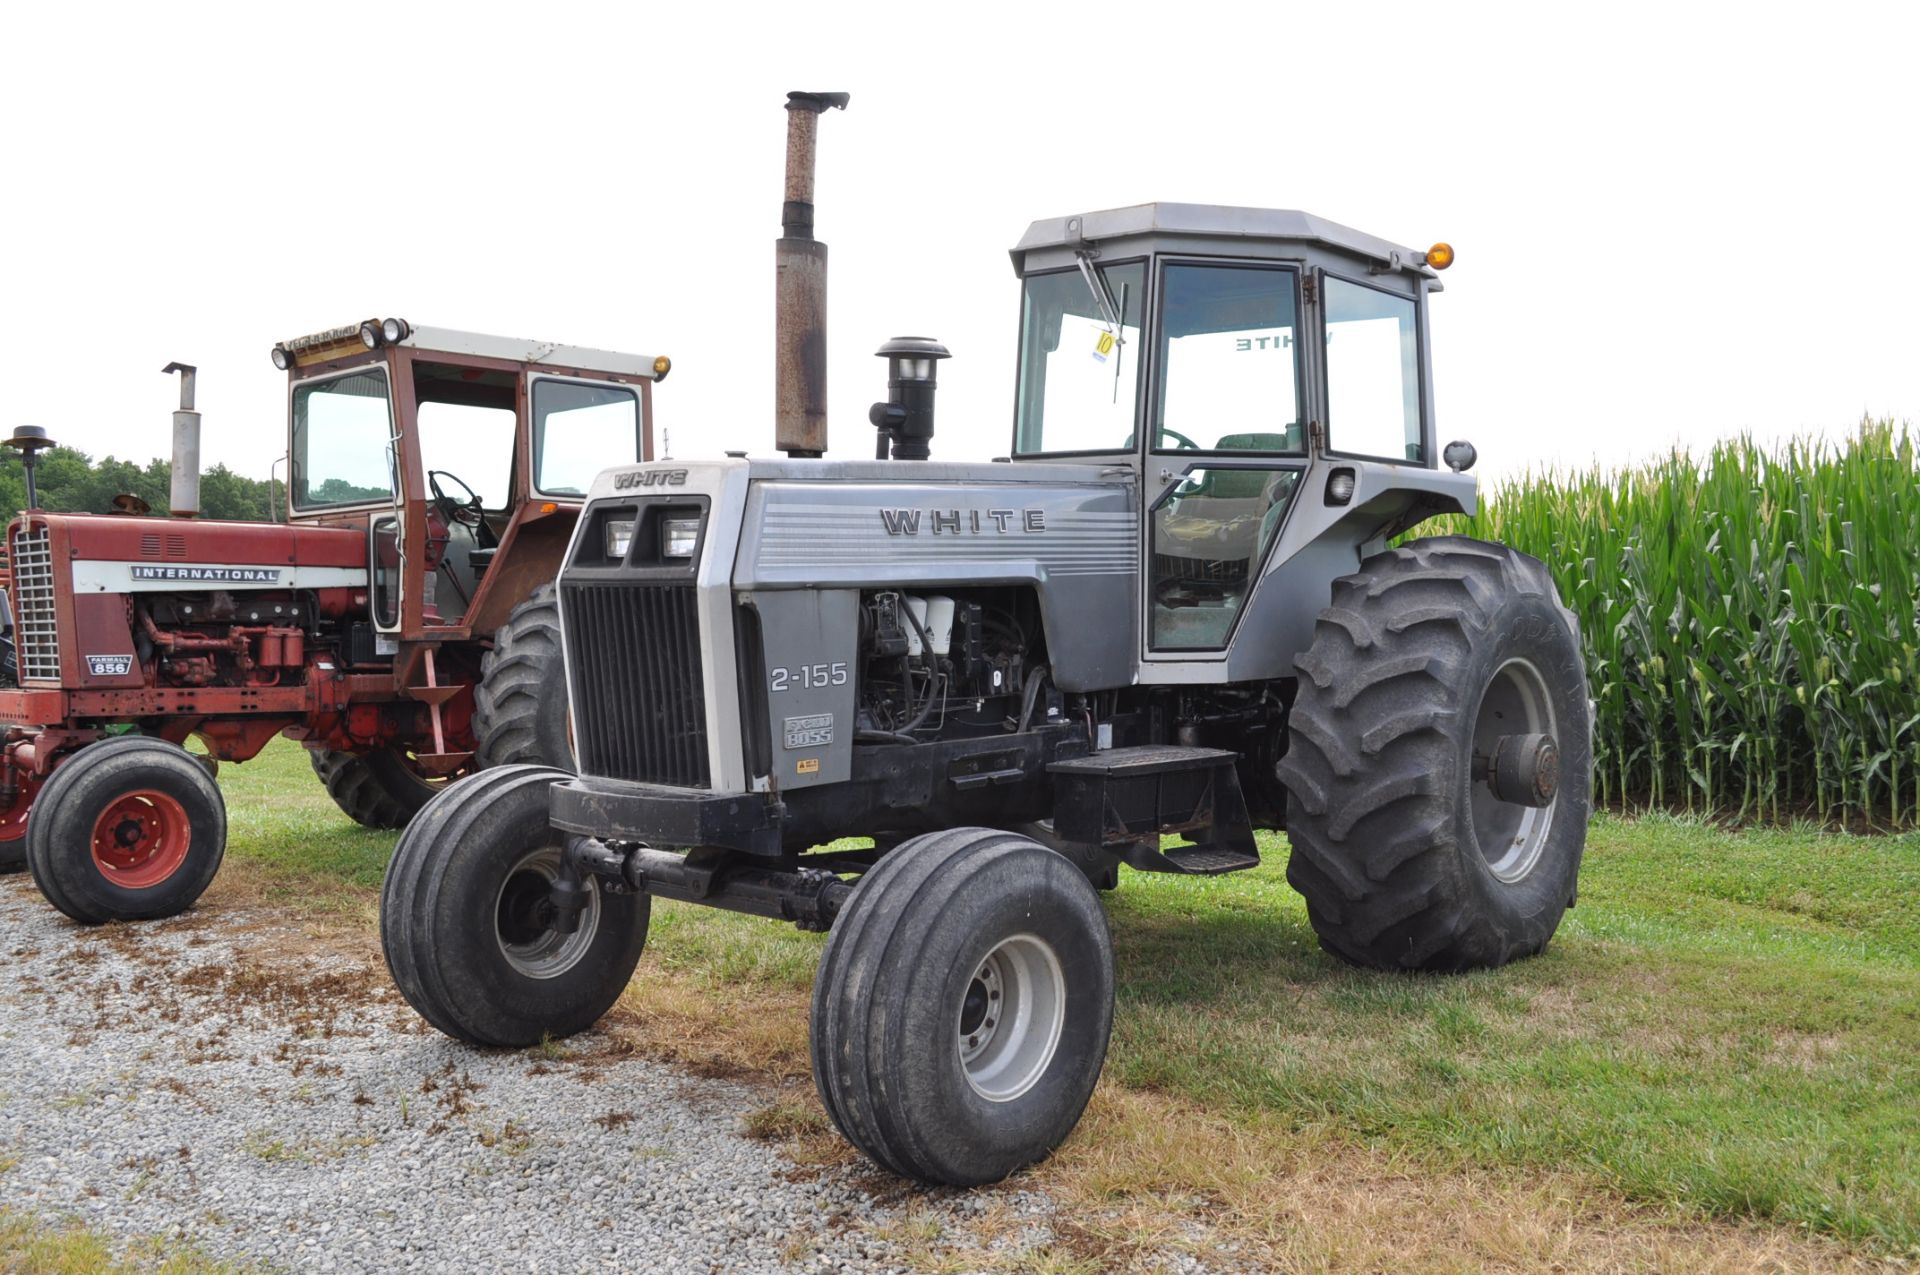 White 2-155 tractor, diesel, 24.5-32 rear, 14L-16.1 front, 3 pt, 3 hyd remotes, 1000 pto, C/H/A, - Image 4 of 31